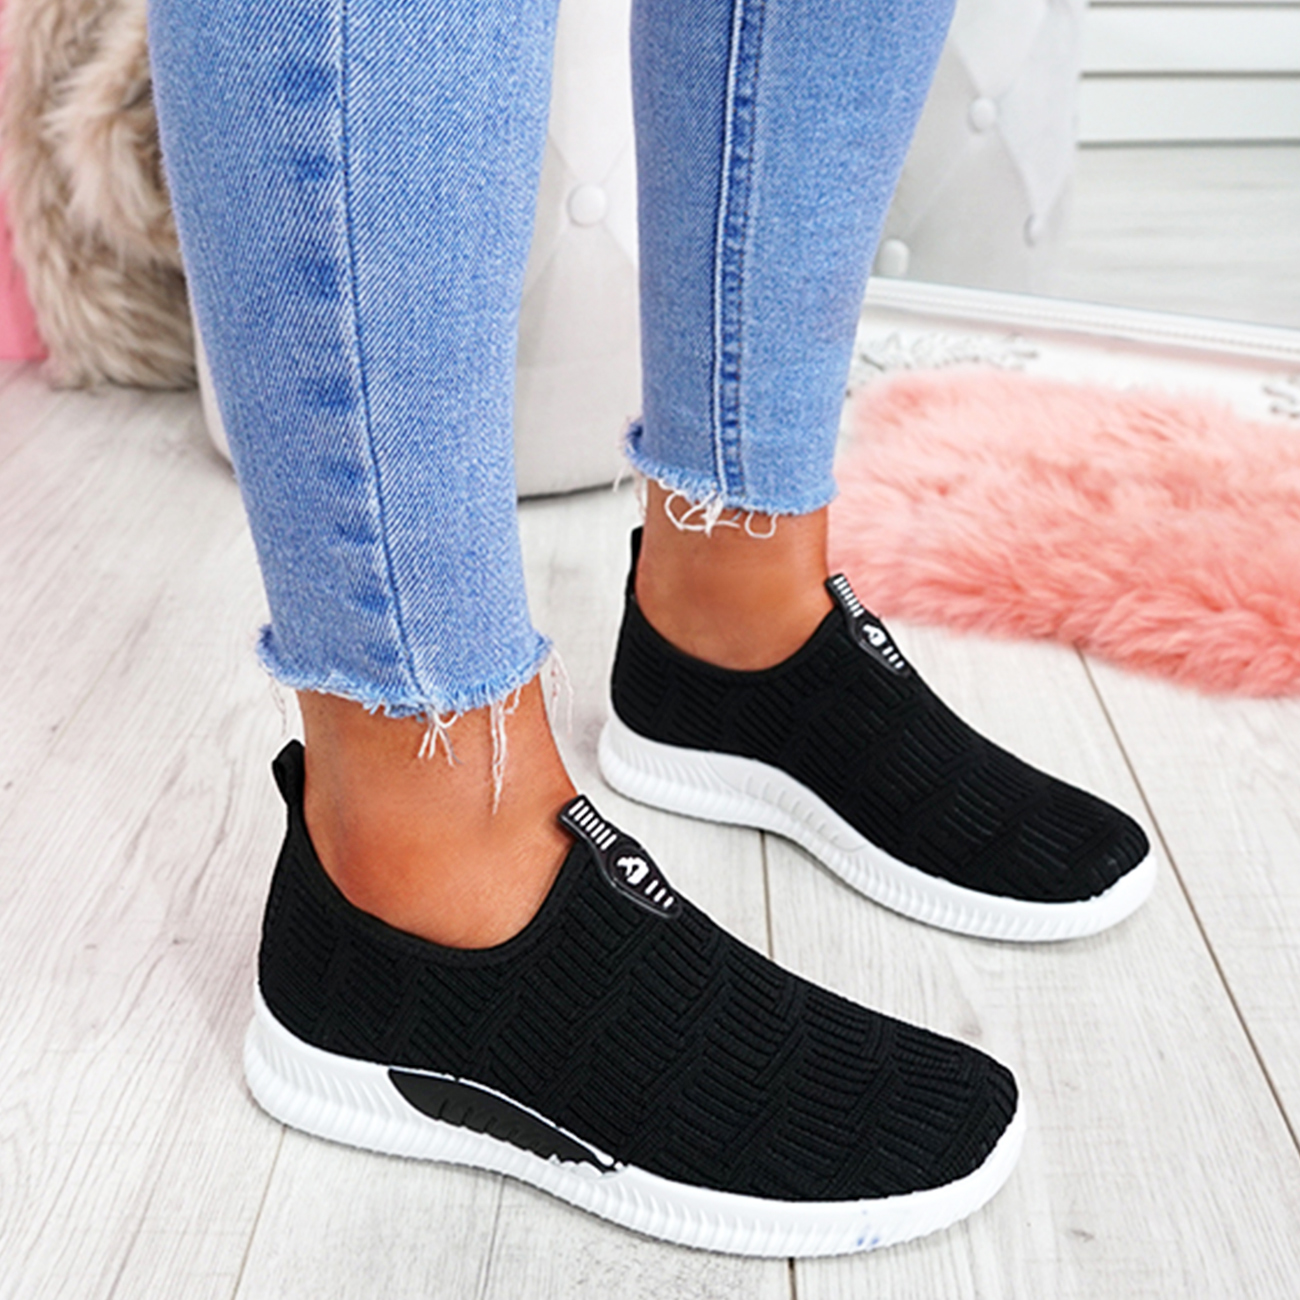 WOMENS LADIES KNIT TRAINERS SLIP ON  SNEAKERS  LADY HEEL PARTY SHOES SIZE 